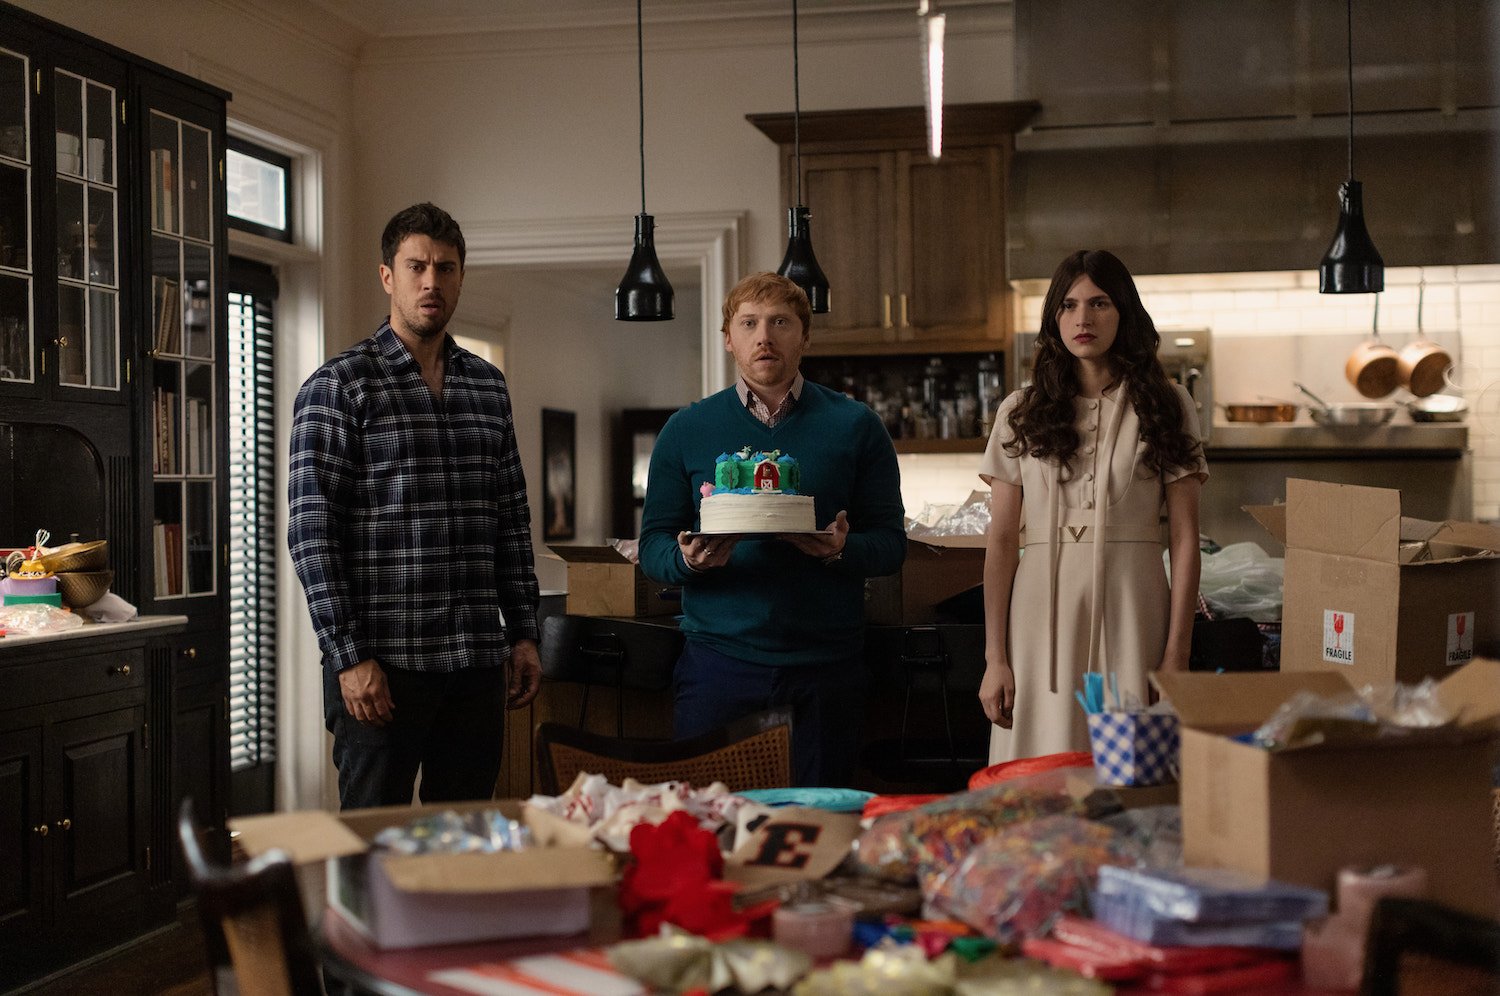 'Servant' Season 4 production still featuring Toby Kebbell, Rupert Grint, and Nell Tiger Free standing in the kitchen while Grint holds a cake.